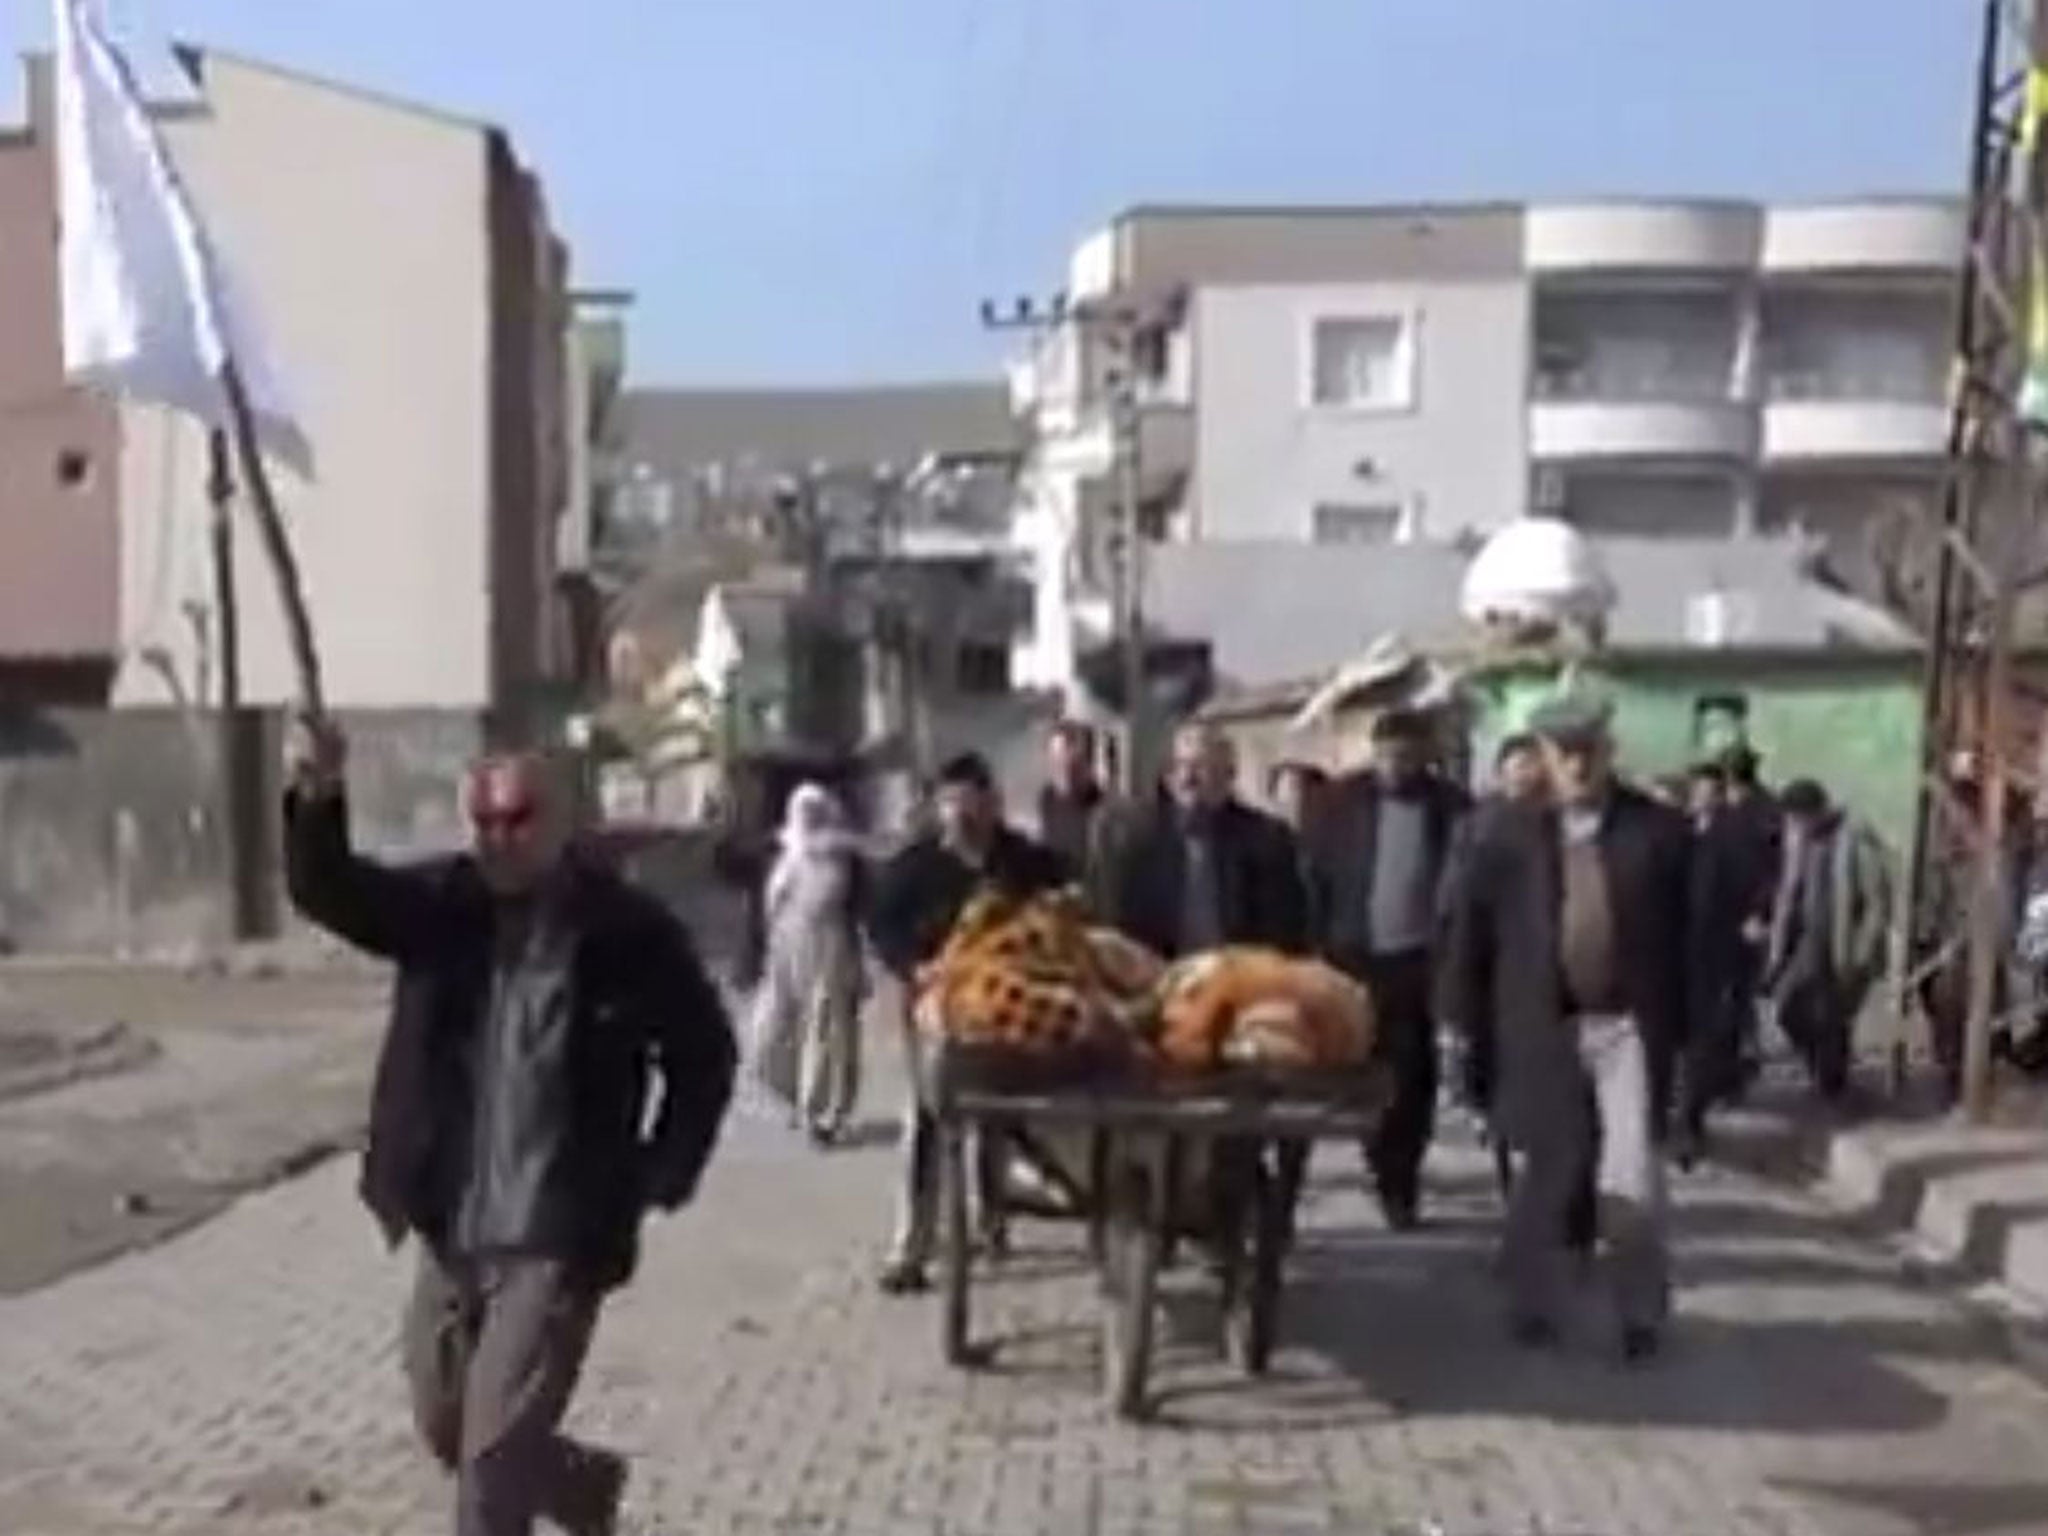 In the video, several civilians are shown waving white flags as they walk with a cart which appears to hold two covered bodies